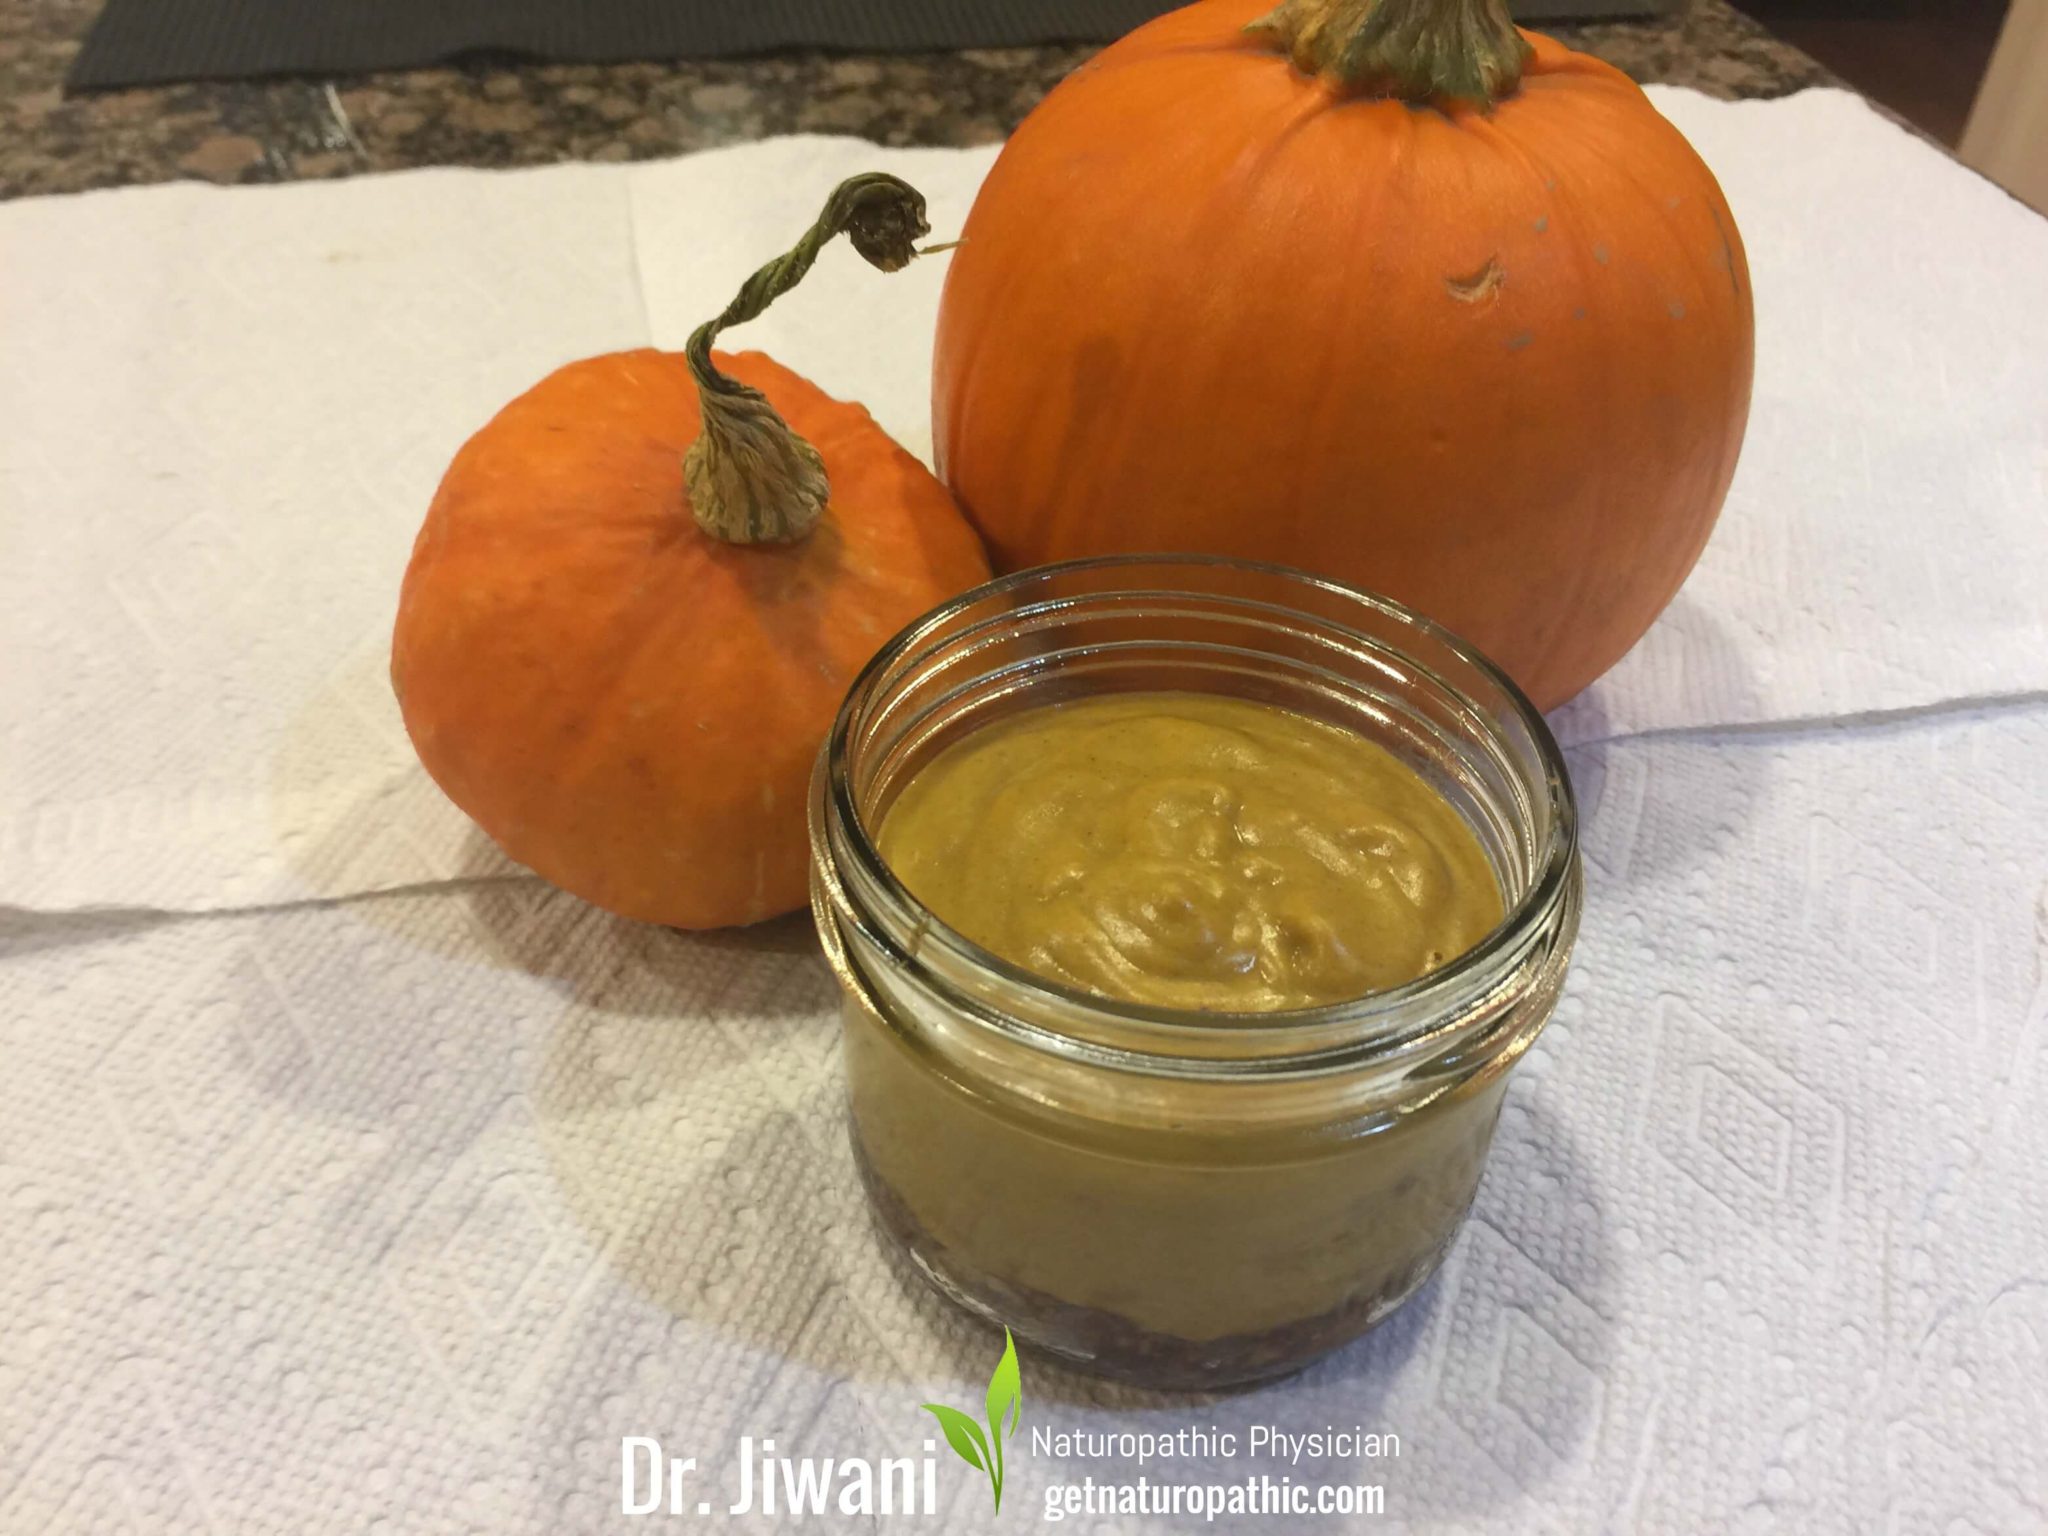 Dr. Jiwani's Pumpkin Pie Filling is Flavourful, Low Carb, Gluten-Free, Egg-Free, Dairy-Free, Soy-Free, Corn-Free, Ideal For Paleo, Keto, Vegan & Allergy-Free Diets